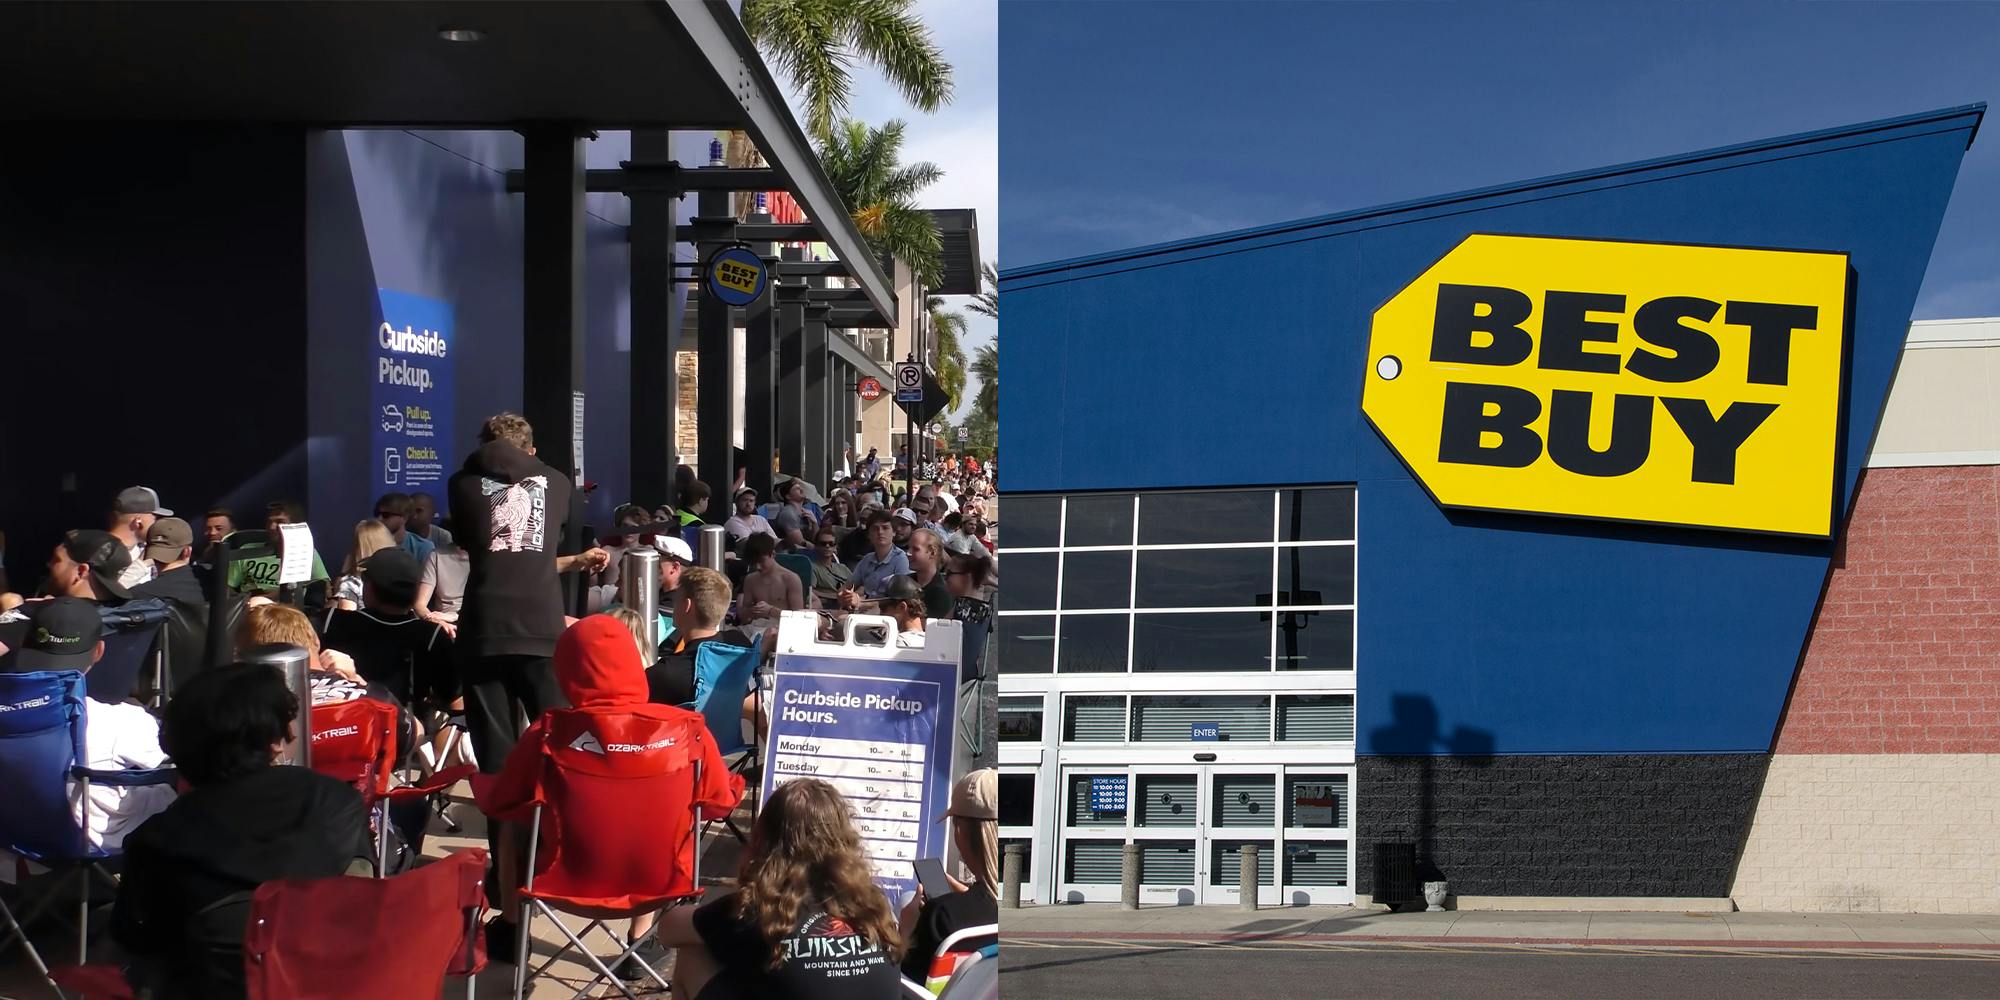 Best Buy customer organizes long line to camp out before open as prank.